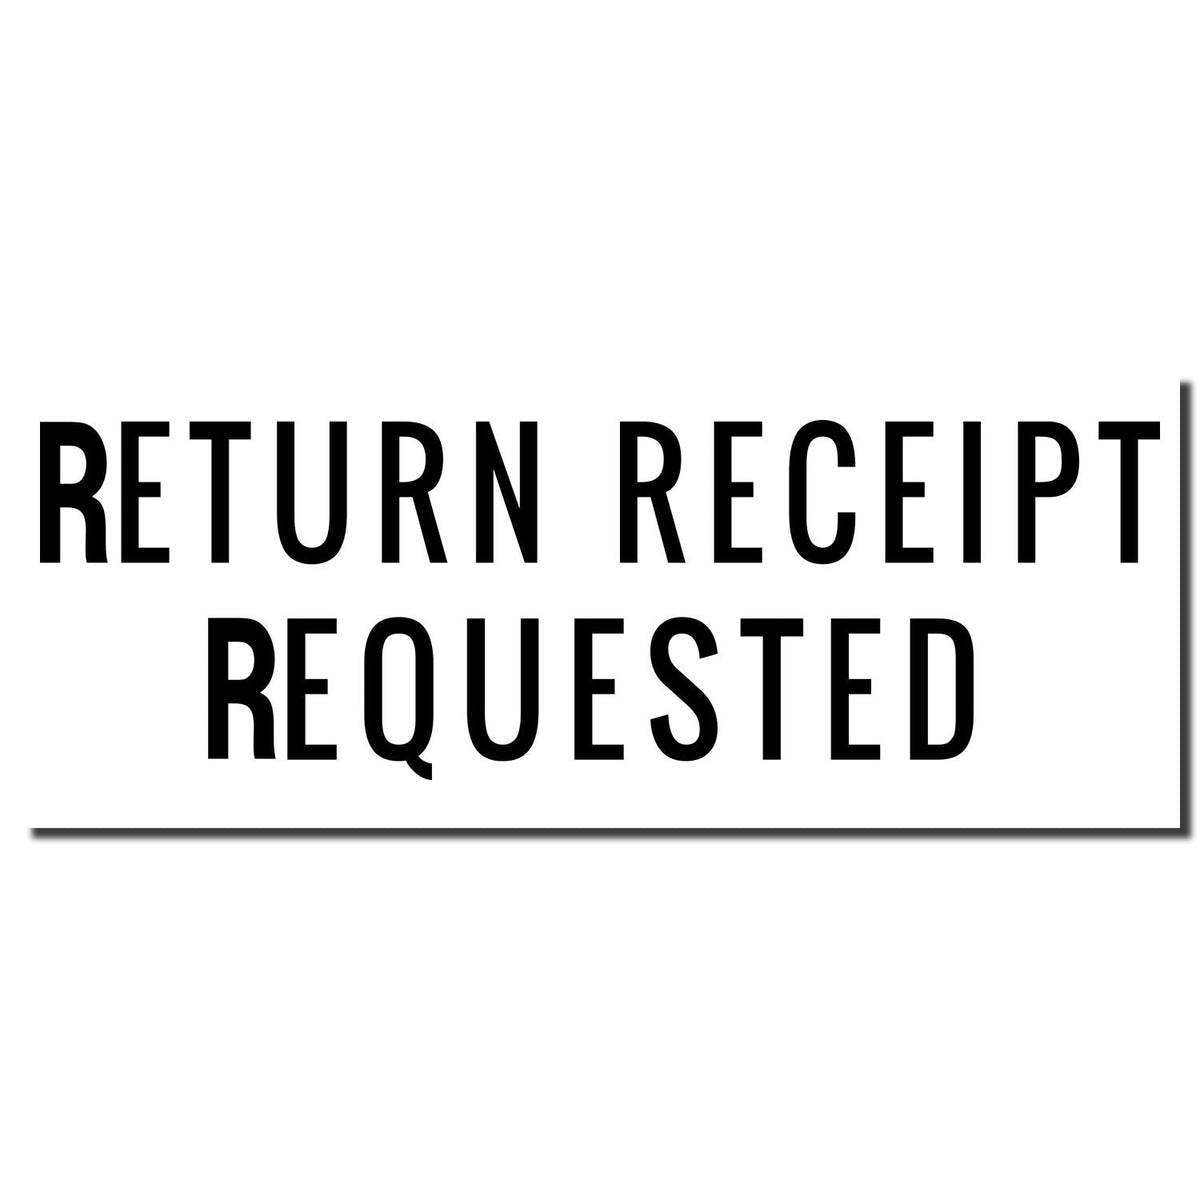 Enlarged Imprint Self-Inking Narrow Font Return Receipt Requested Stamp Sample